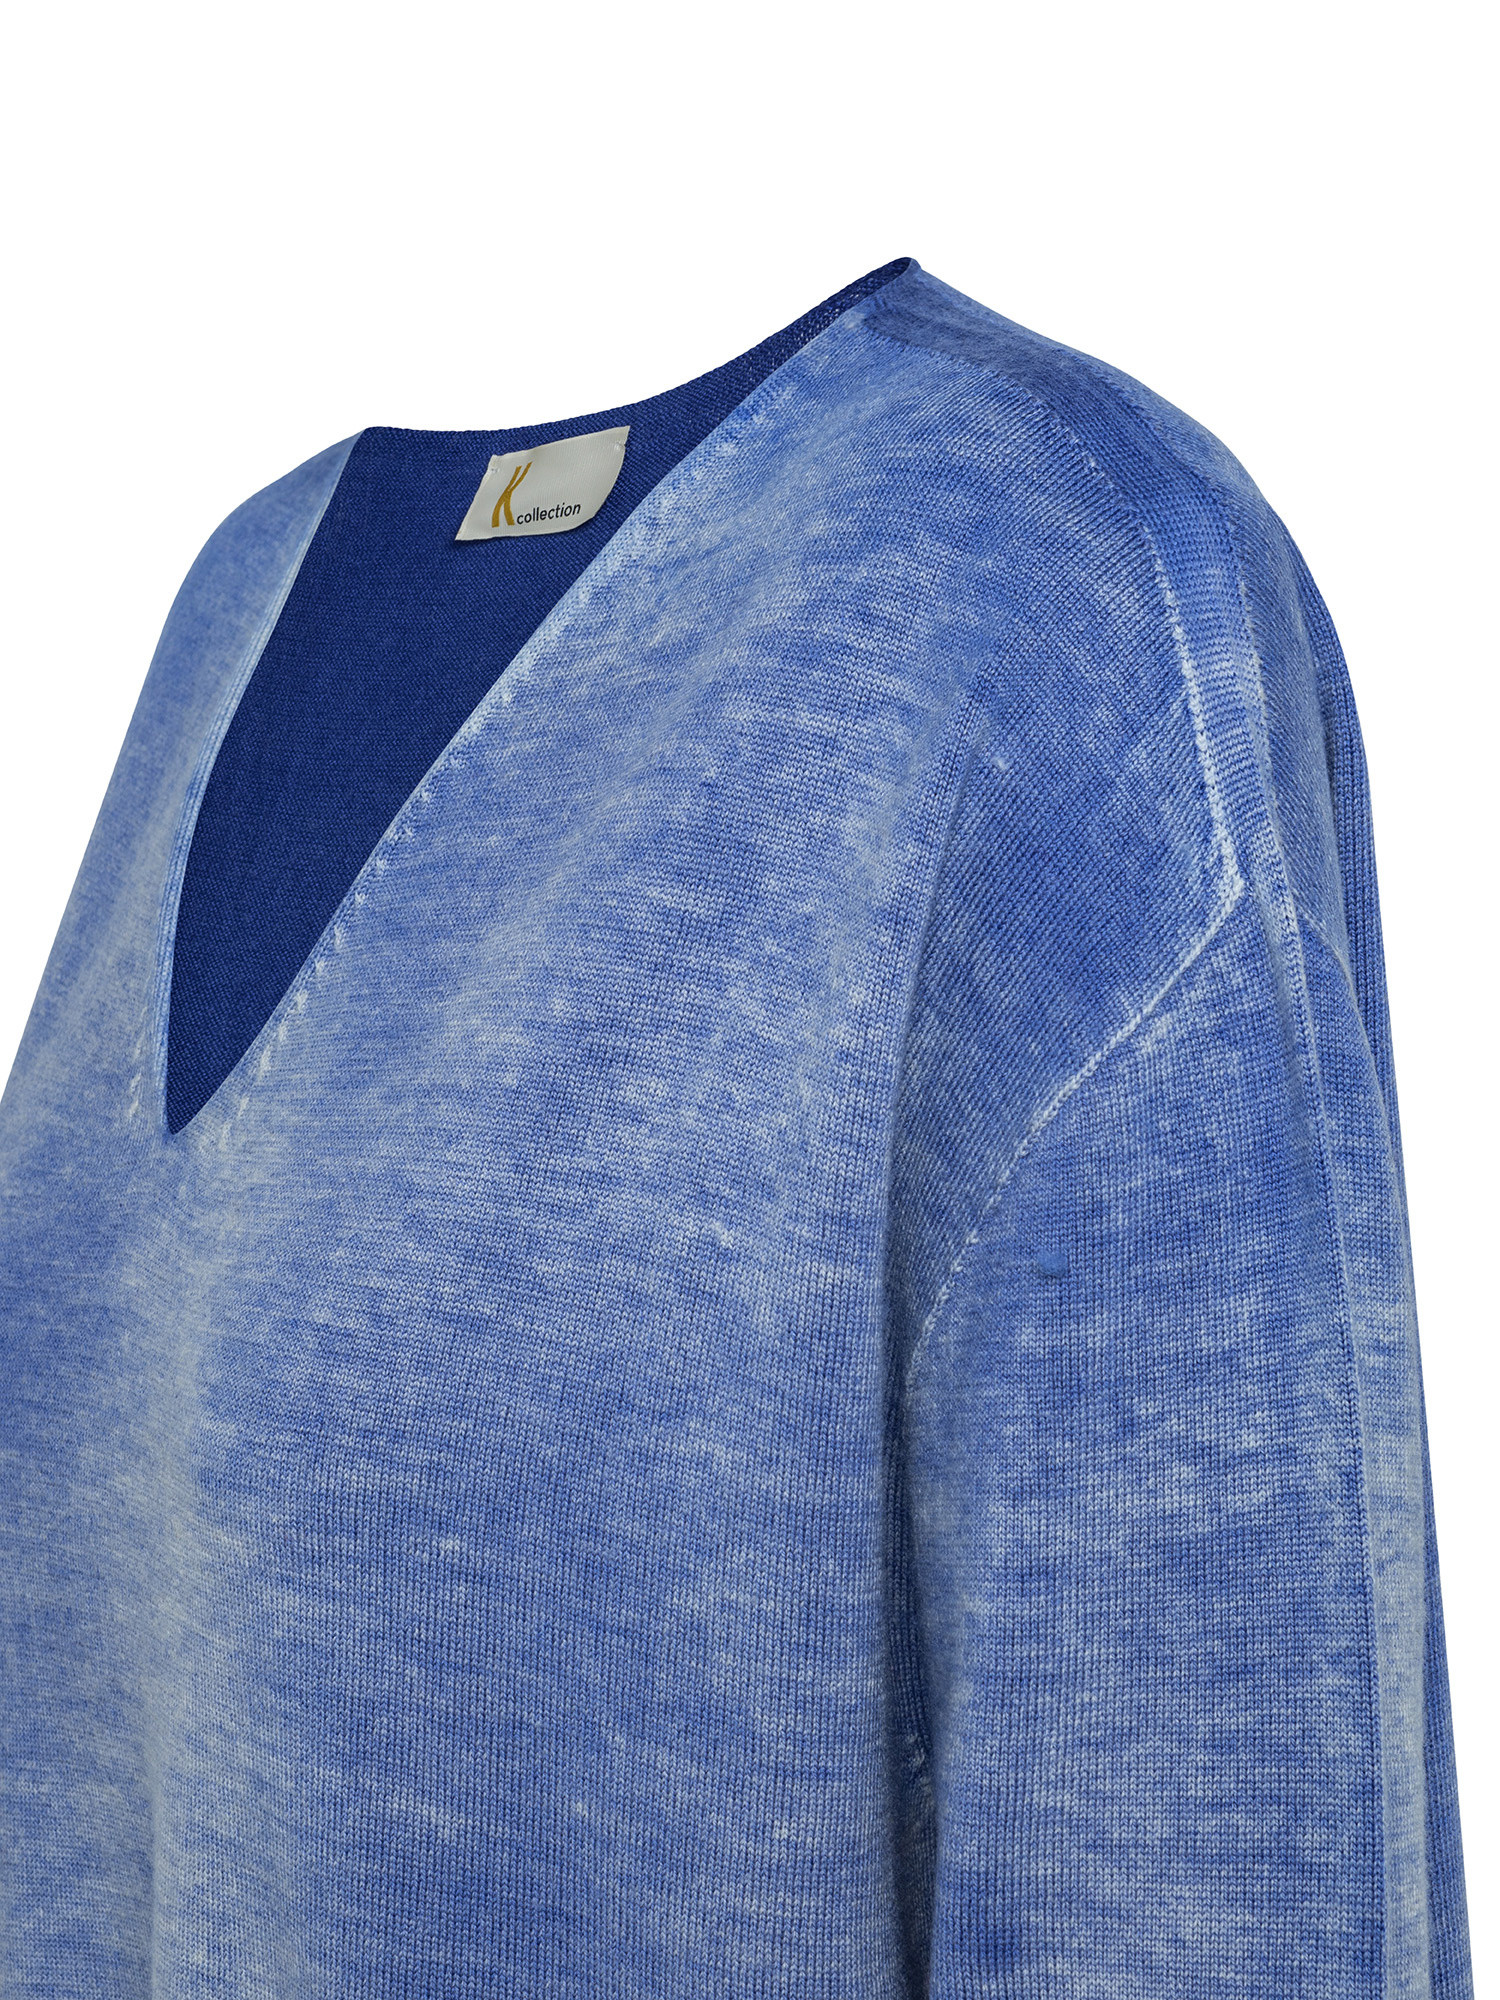 K Collection - Maglia scollo a V in lana extrafine, Blu, large image number 2